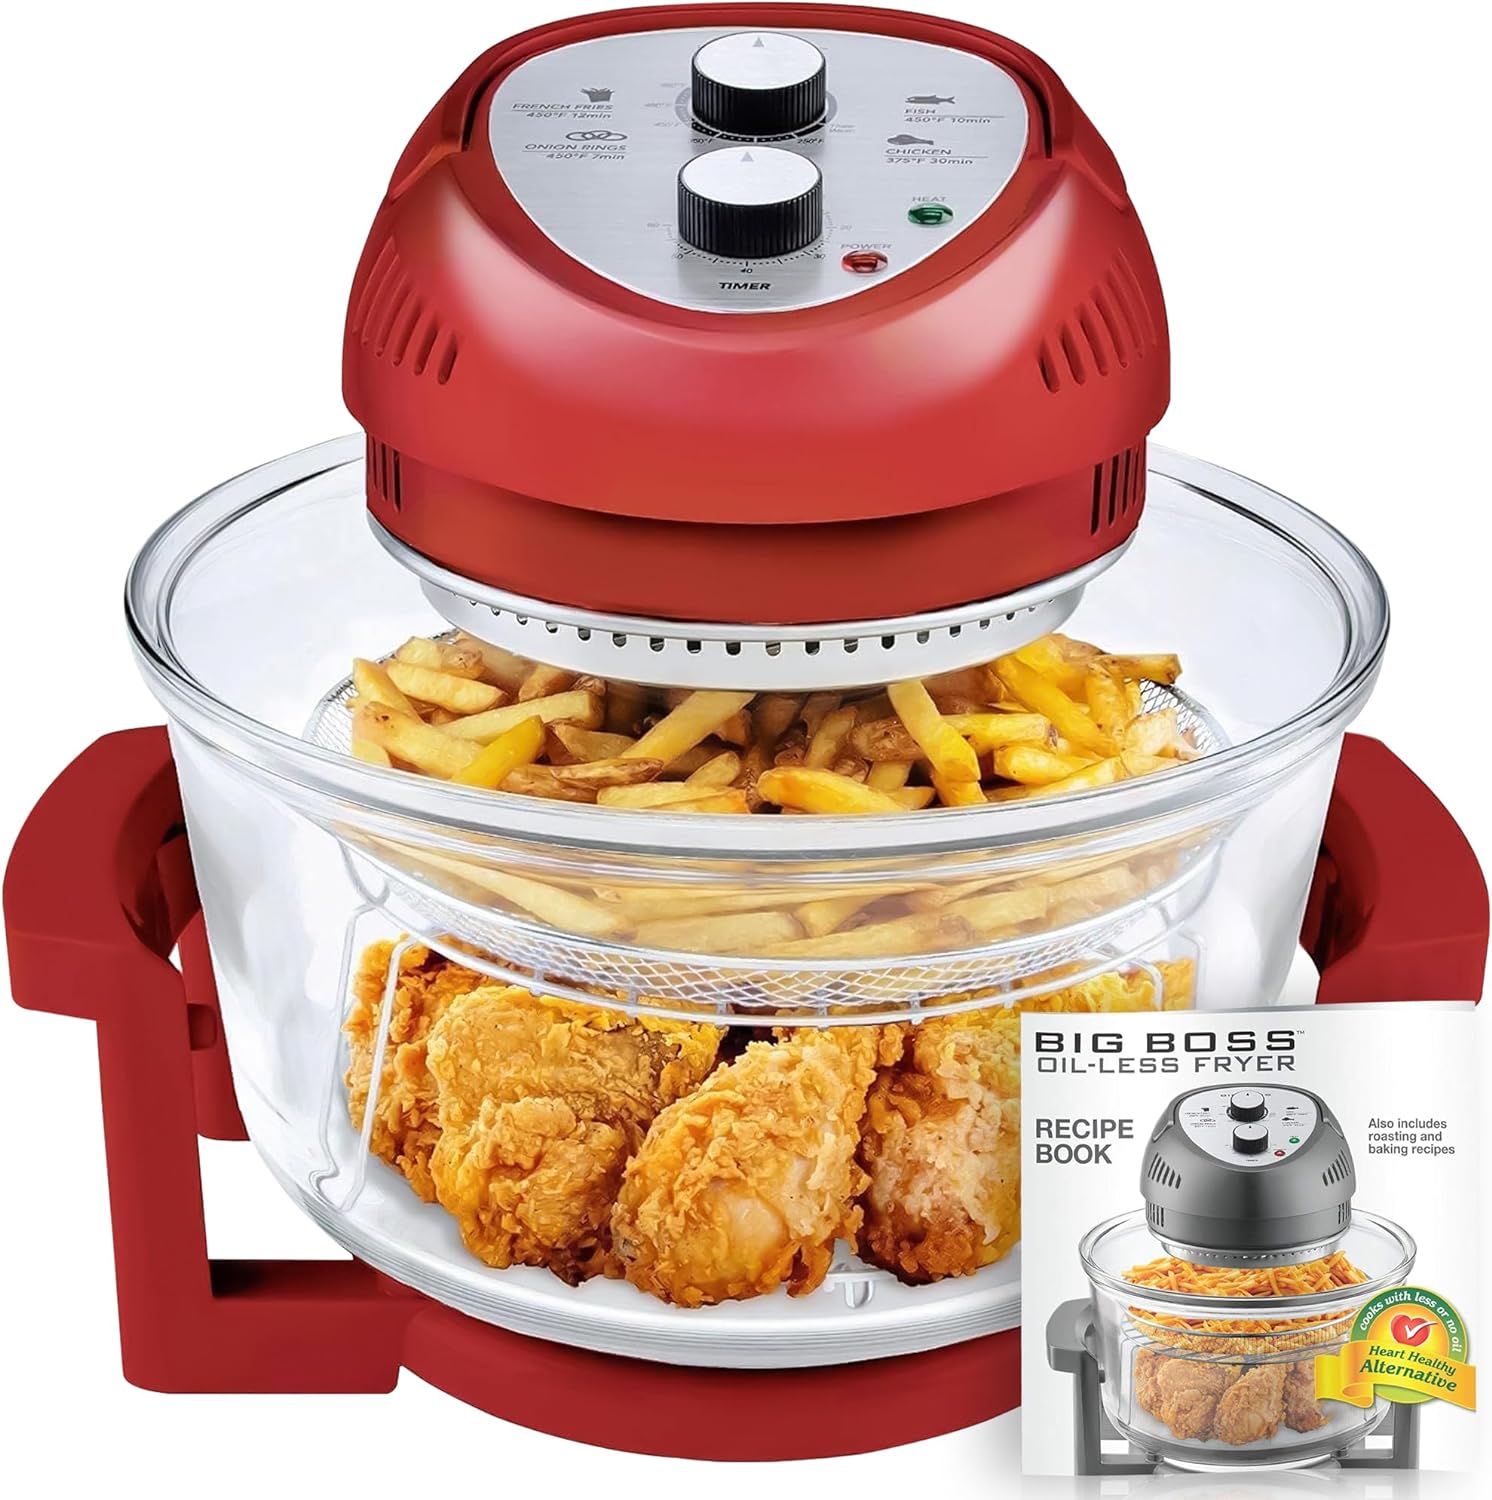 Big Boss 16Qt Large Air Fryer Oven with 50+ Recipe Book AirFryer Oven Makes Healthier Crispy Foods Red - image 1 of 8